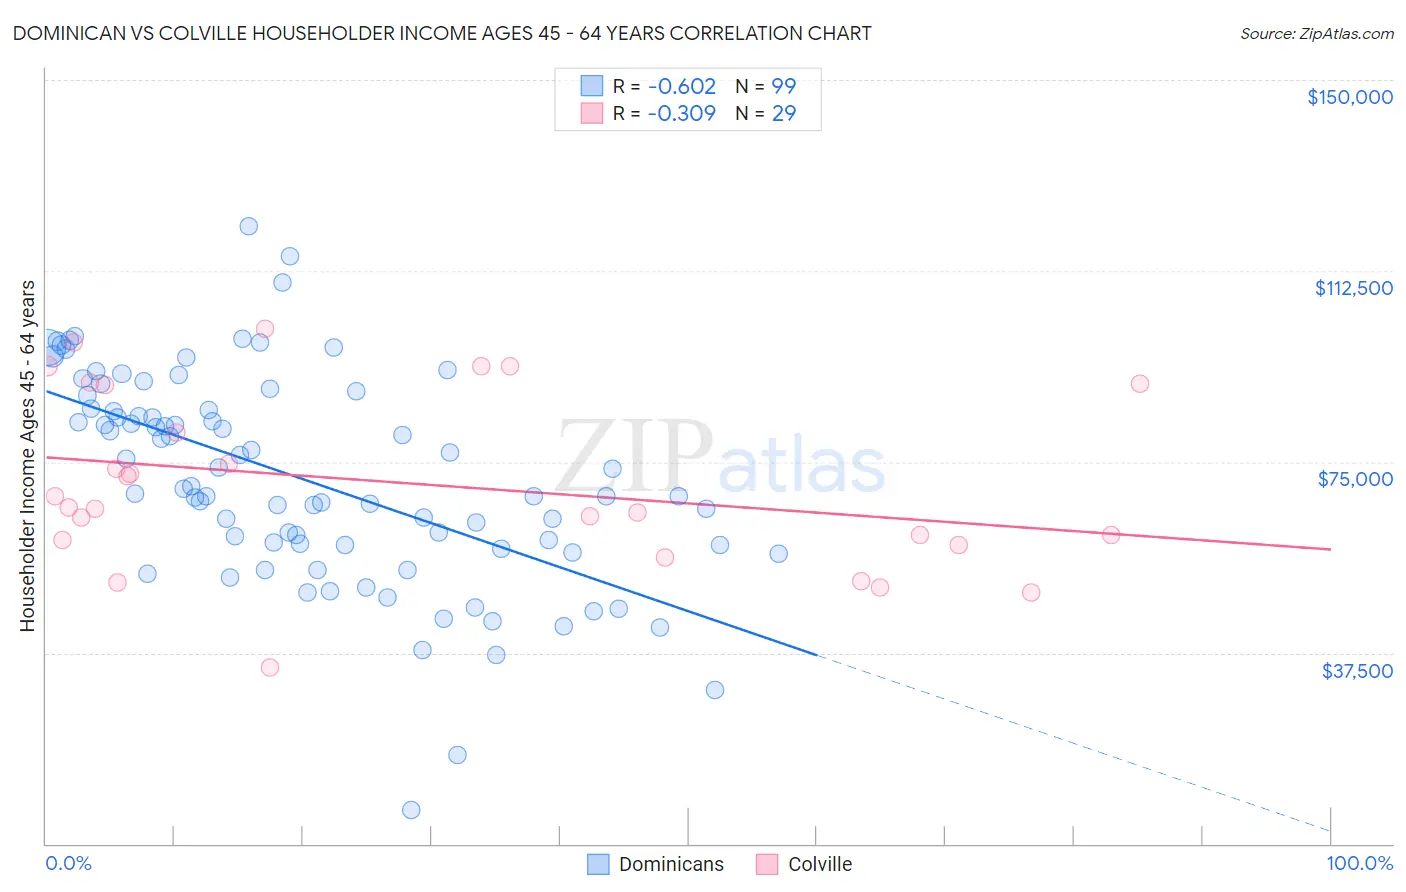 Dominican vs Colville Householder Income Ages 45 - 64 years